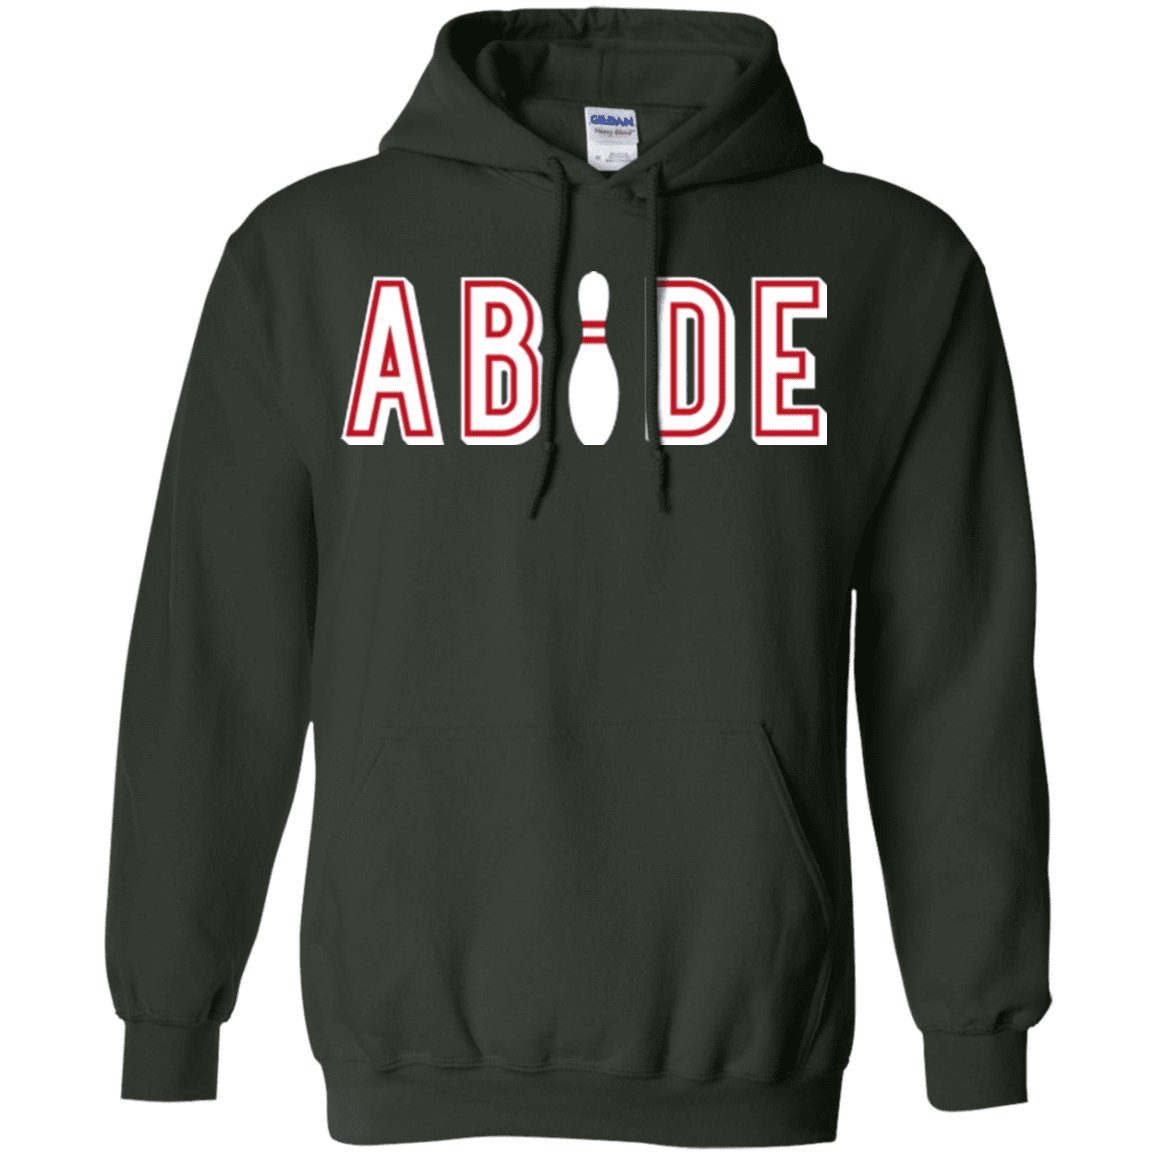 Sweatshirts Forest Green / Small Abide The Dude Big Lebowski Pullover Hoodie